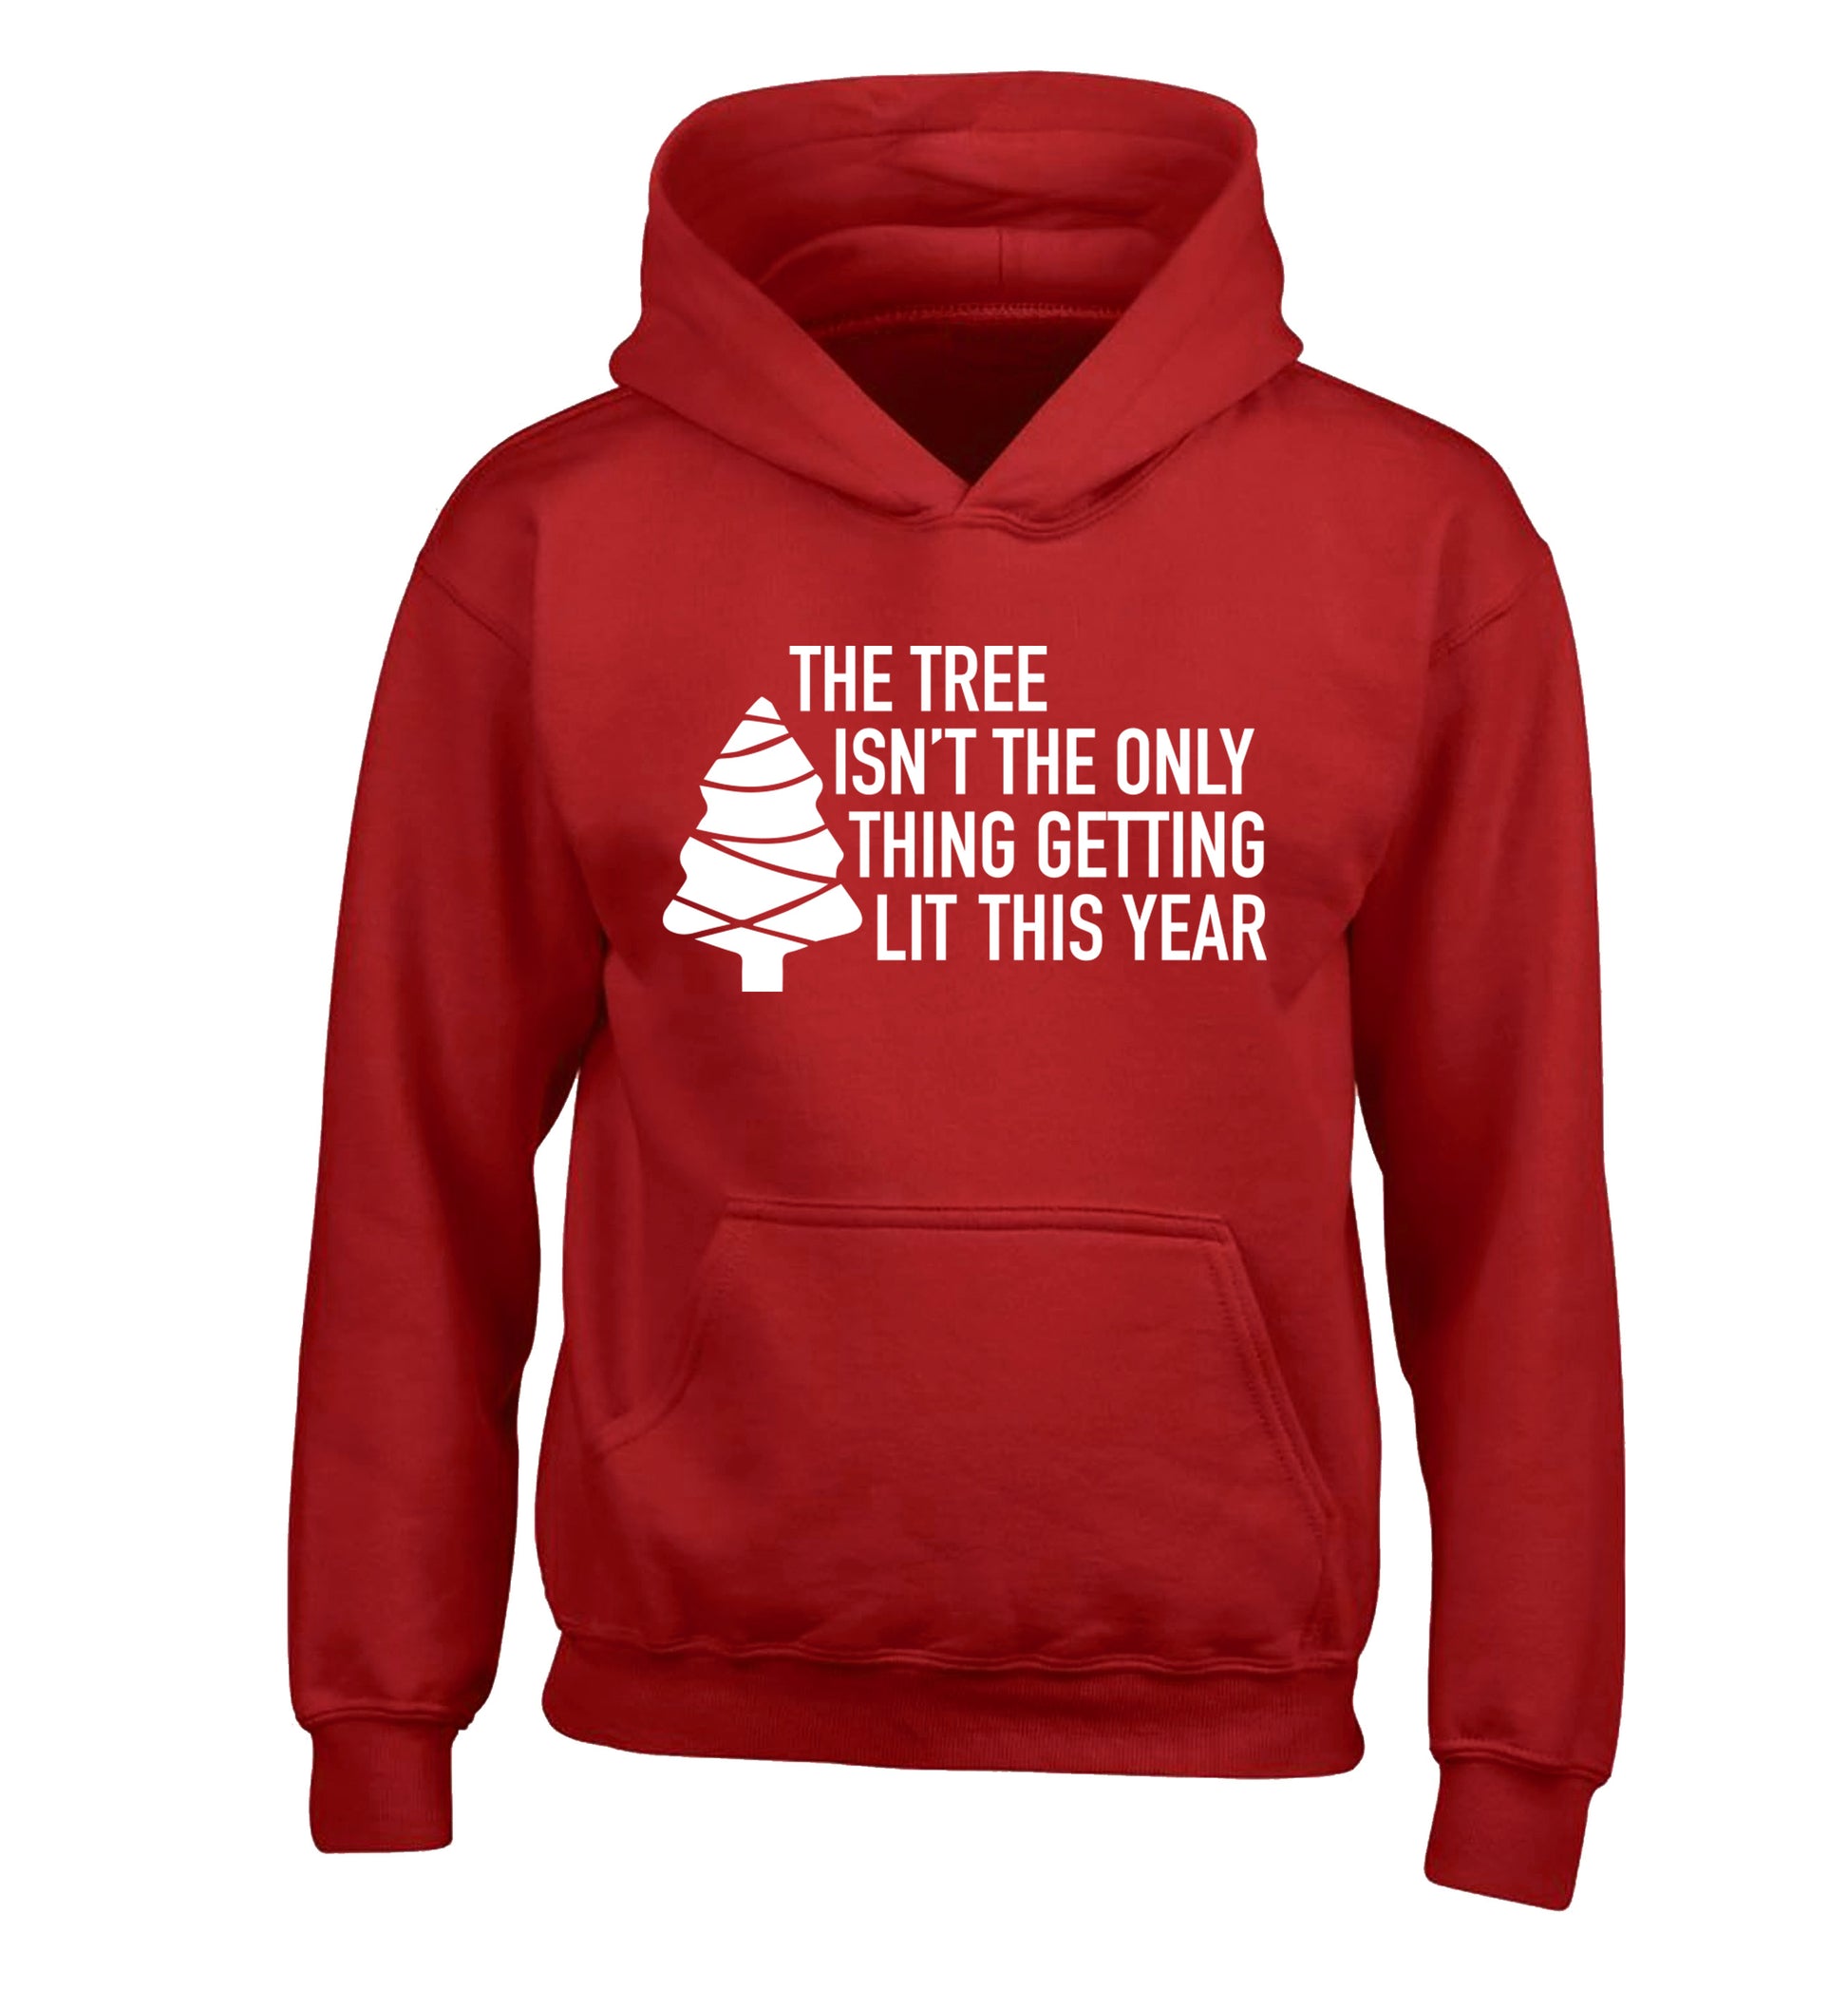 The tree isn't the only thing getting lit this year children's red hoodie 12-14 Years